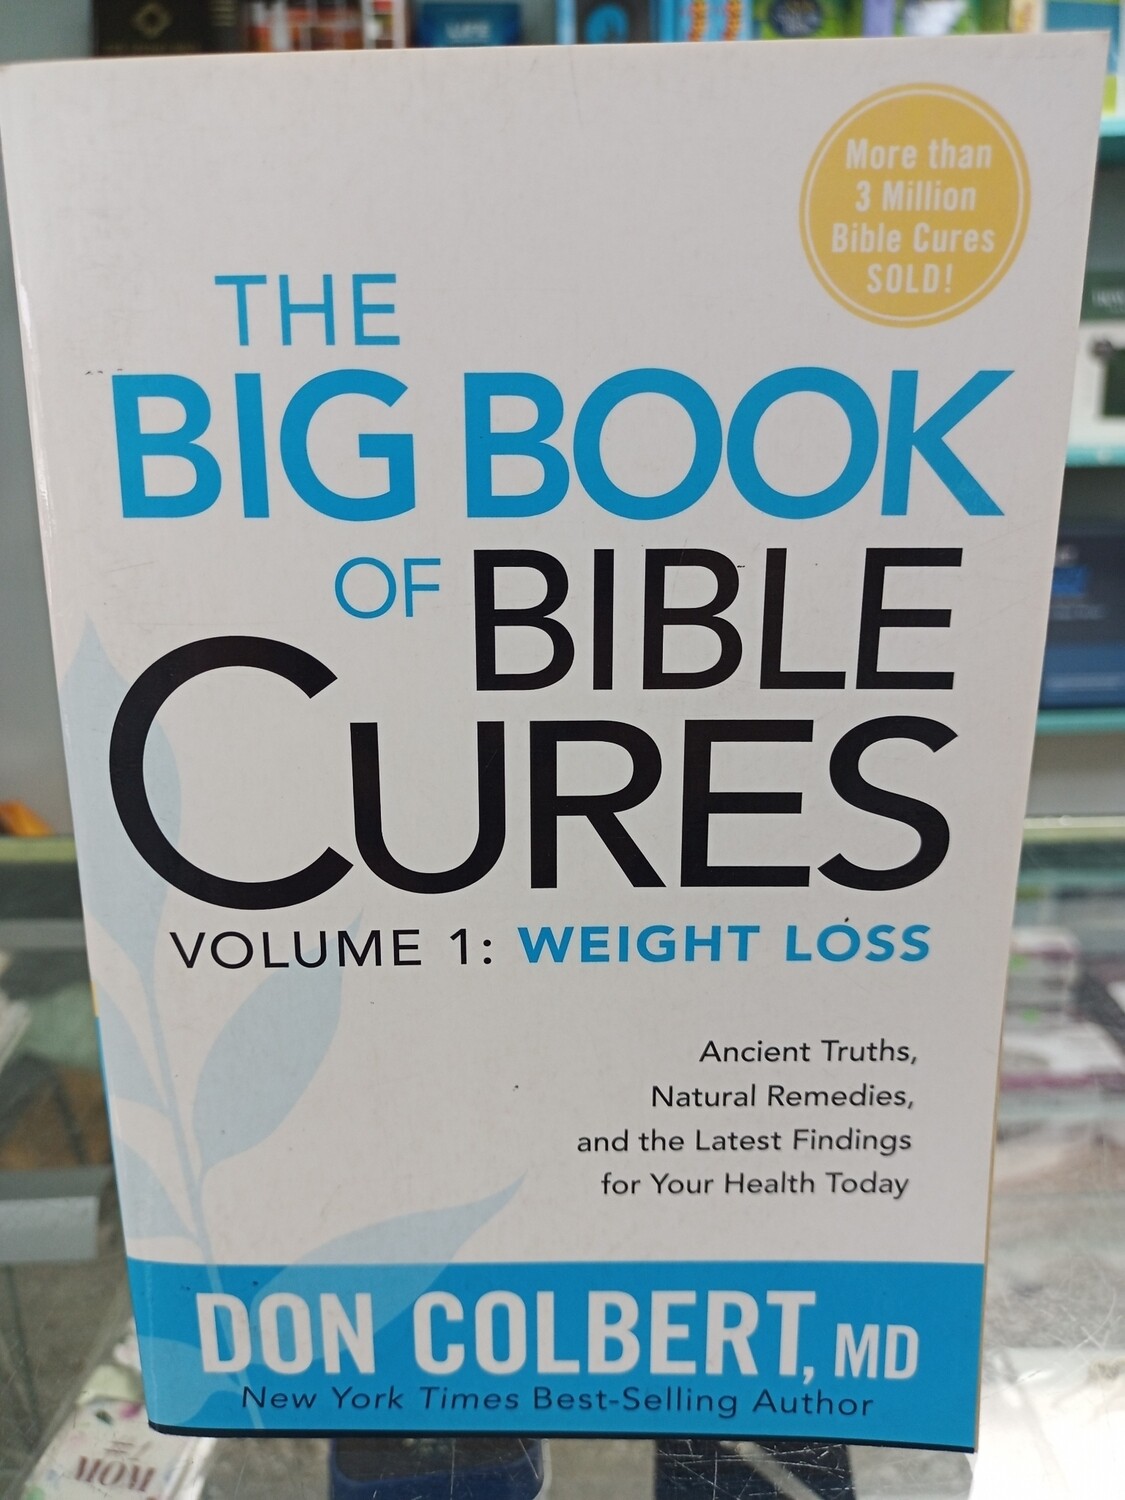 The Big Book of Bible Cures Volume 1: Weight Loss by Don Colbert MD